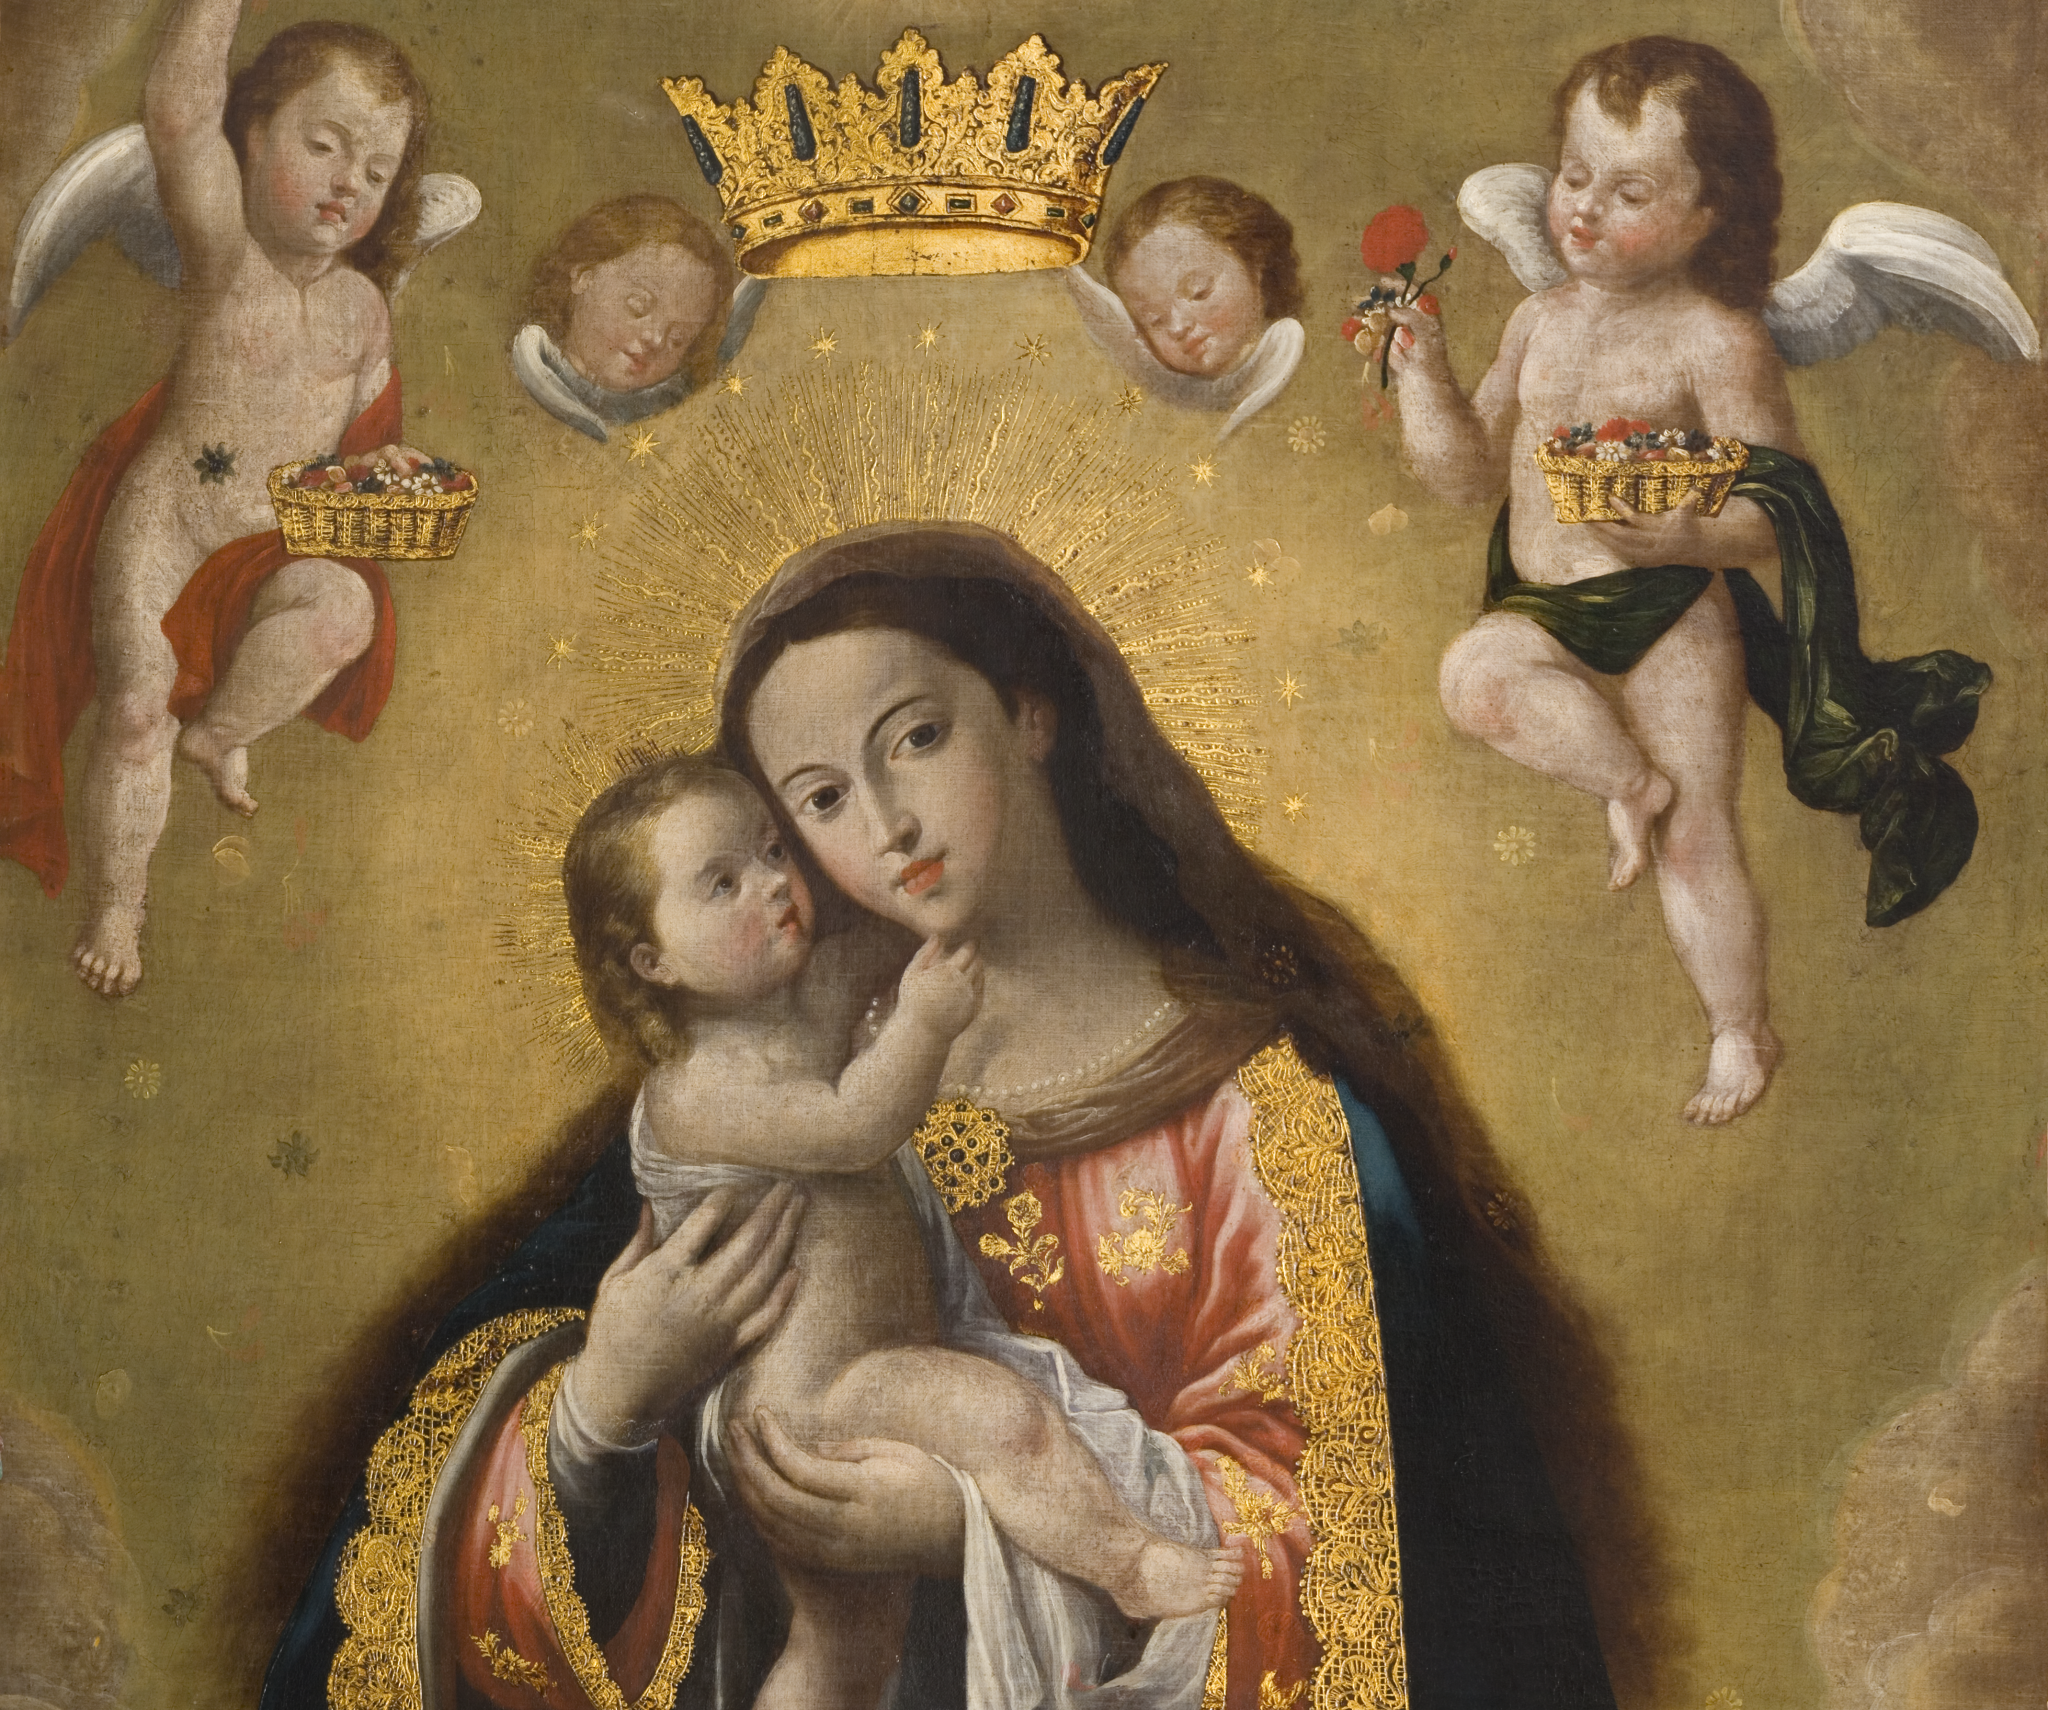 The Beauty of the Virgin Mary and the History of Art